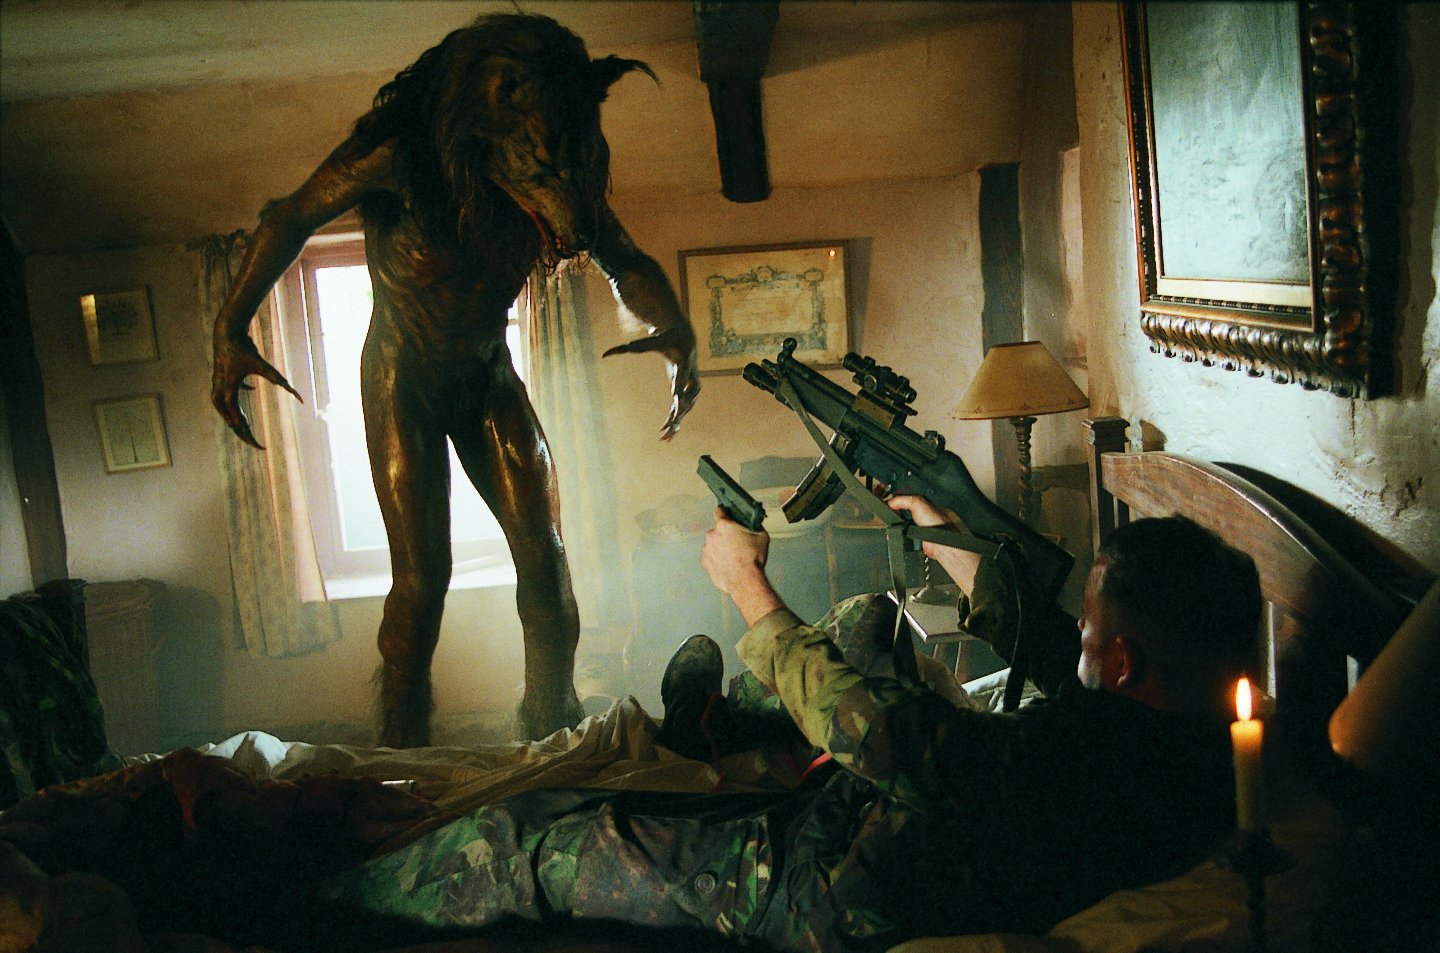 Soldiers vs werewolves in Dog Soldiers (2002)